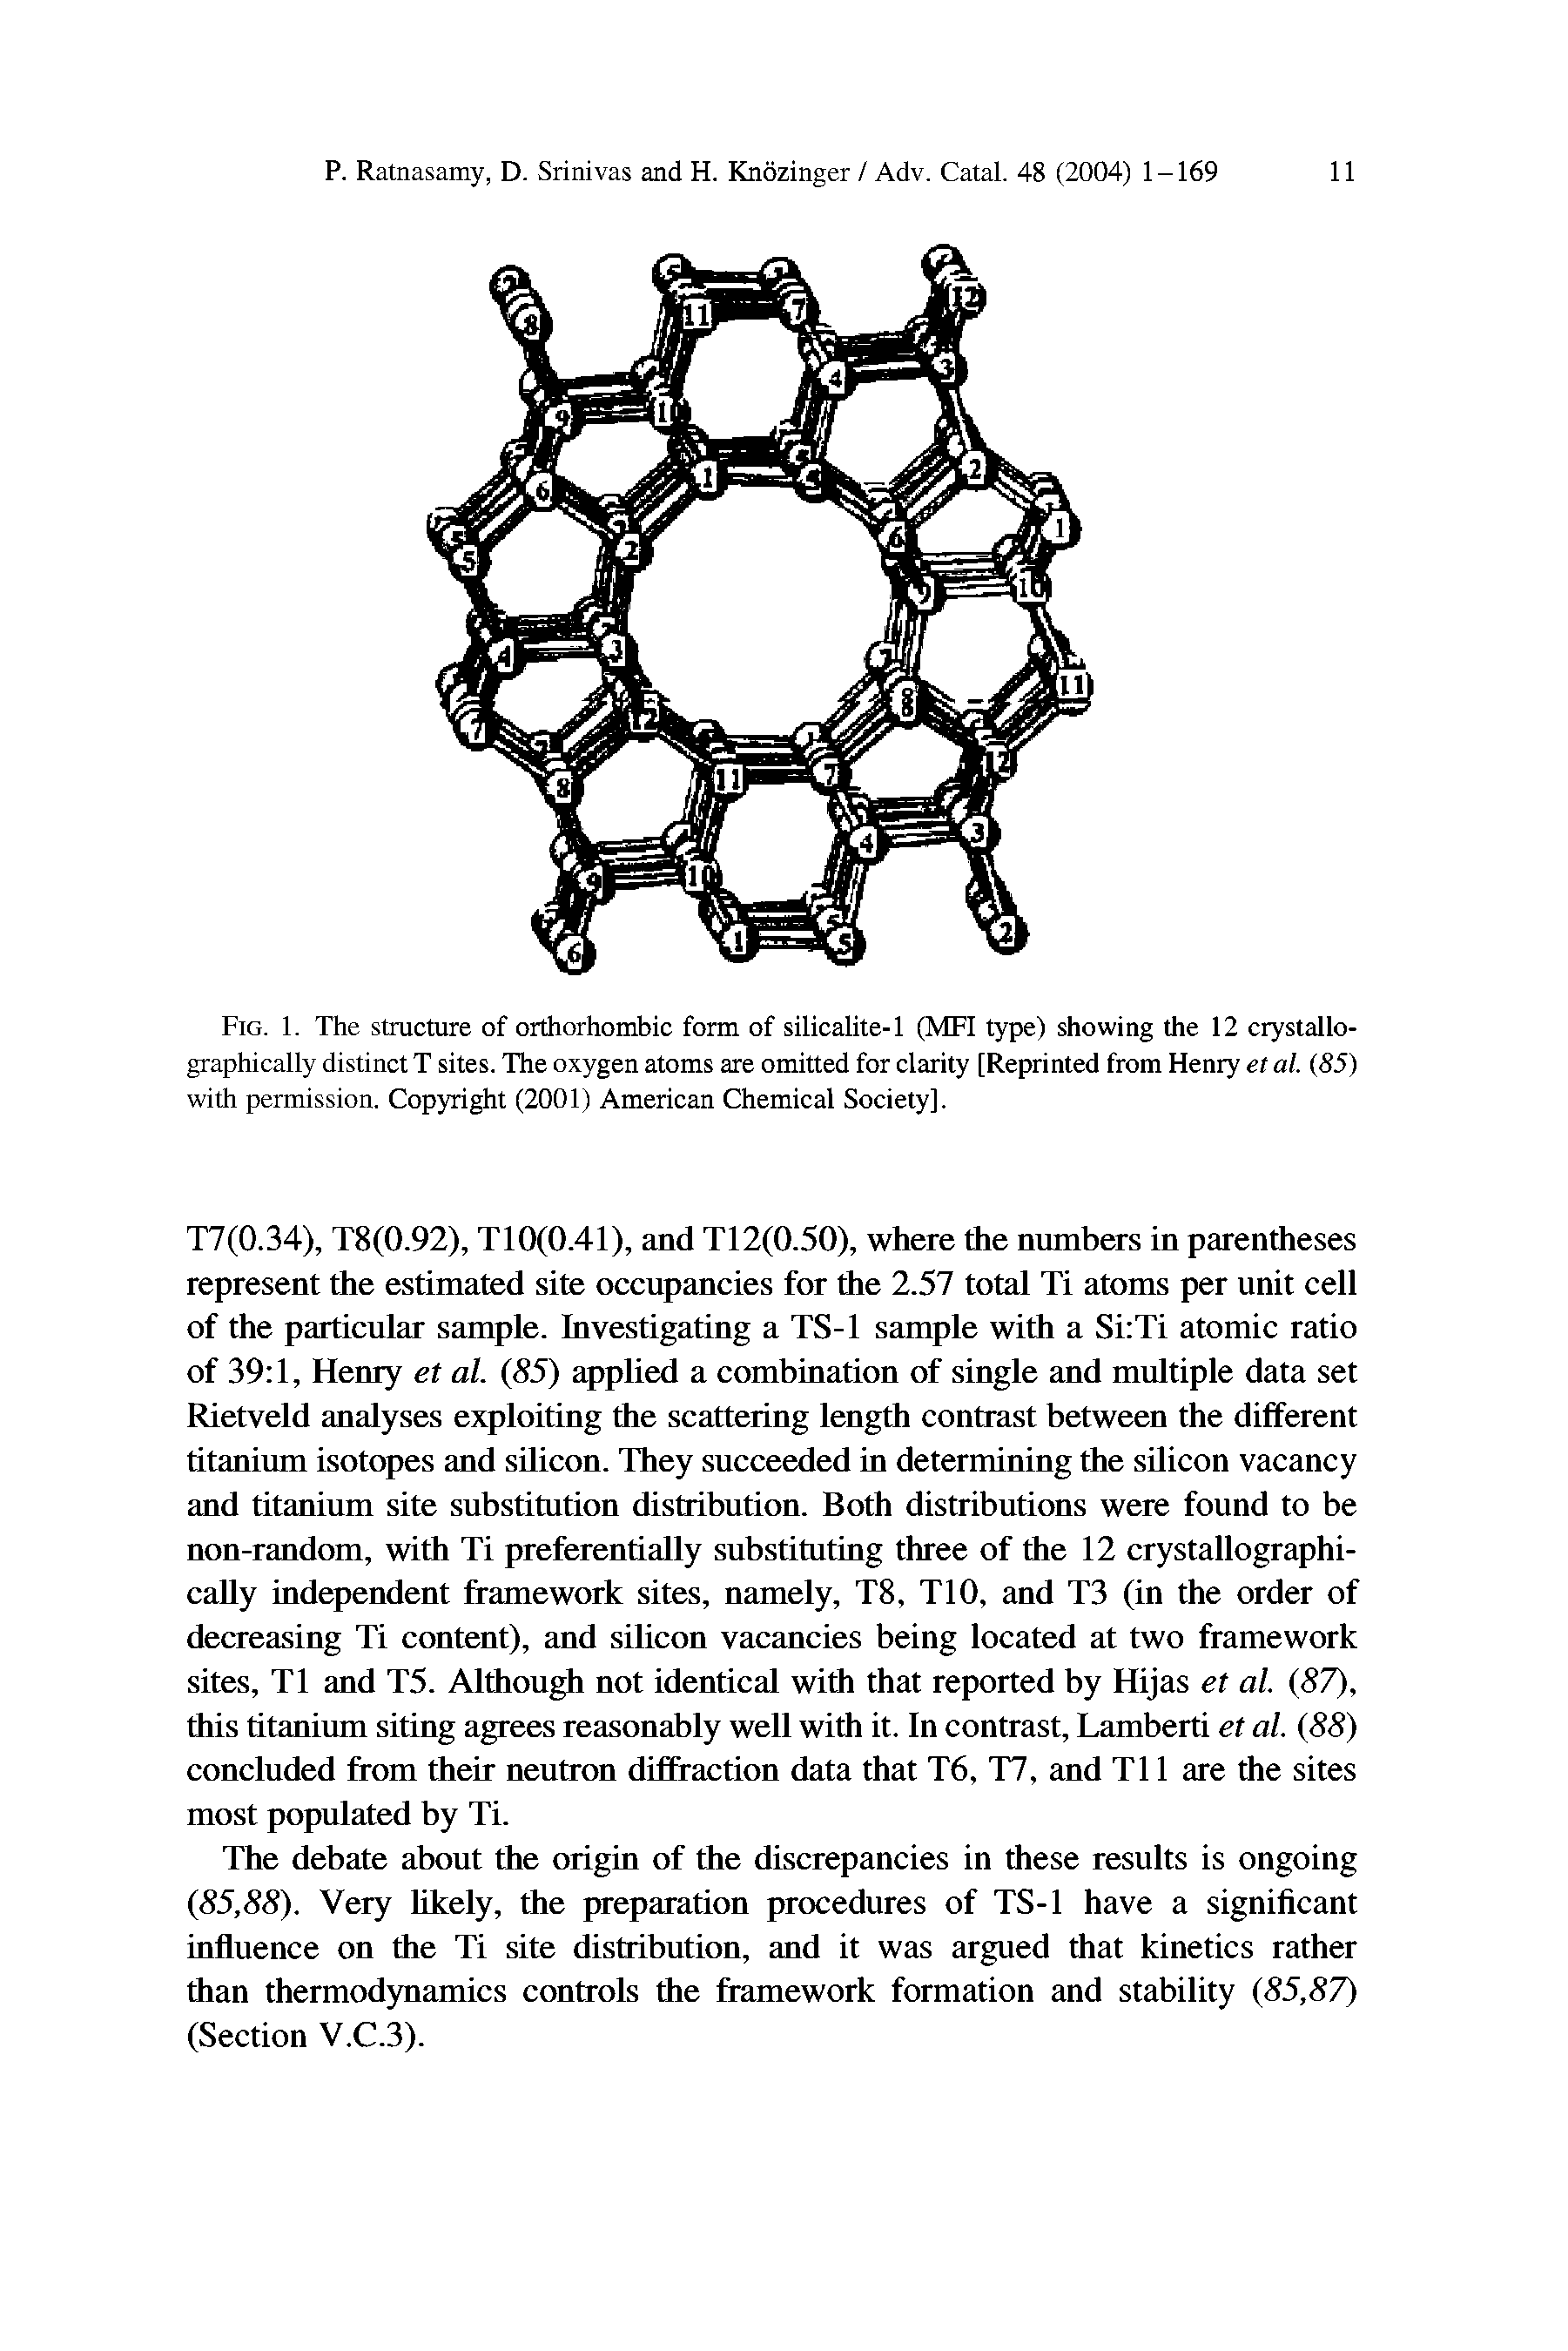 Fig. 1. The structure of orthorhombic form of silicalite-1 (MFI type) showing the 12 crystallo-graphically distinct T sites. The oxygen atoms are omitted for clarity [Reprinted from Henry et al. (85) with permission. Copyright (2001) American Chemical Society].